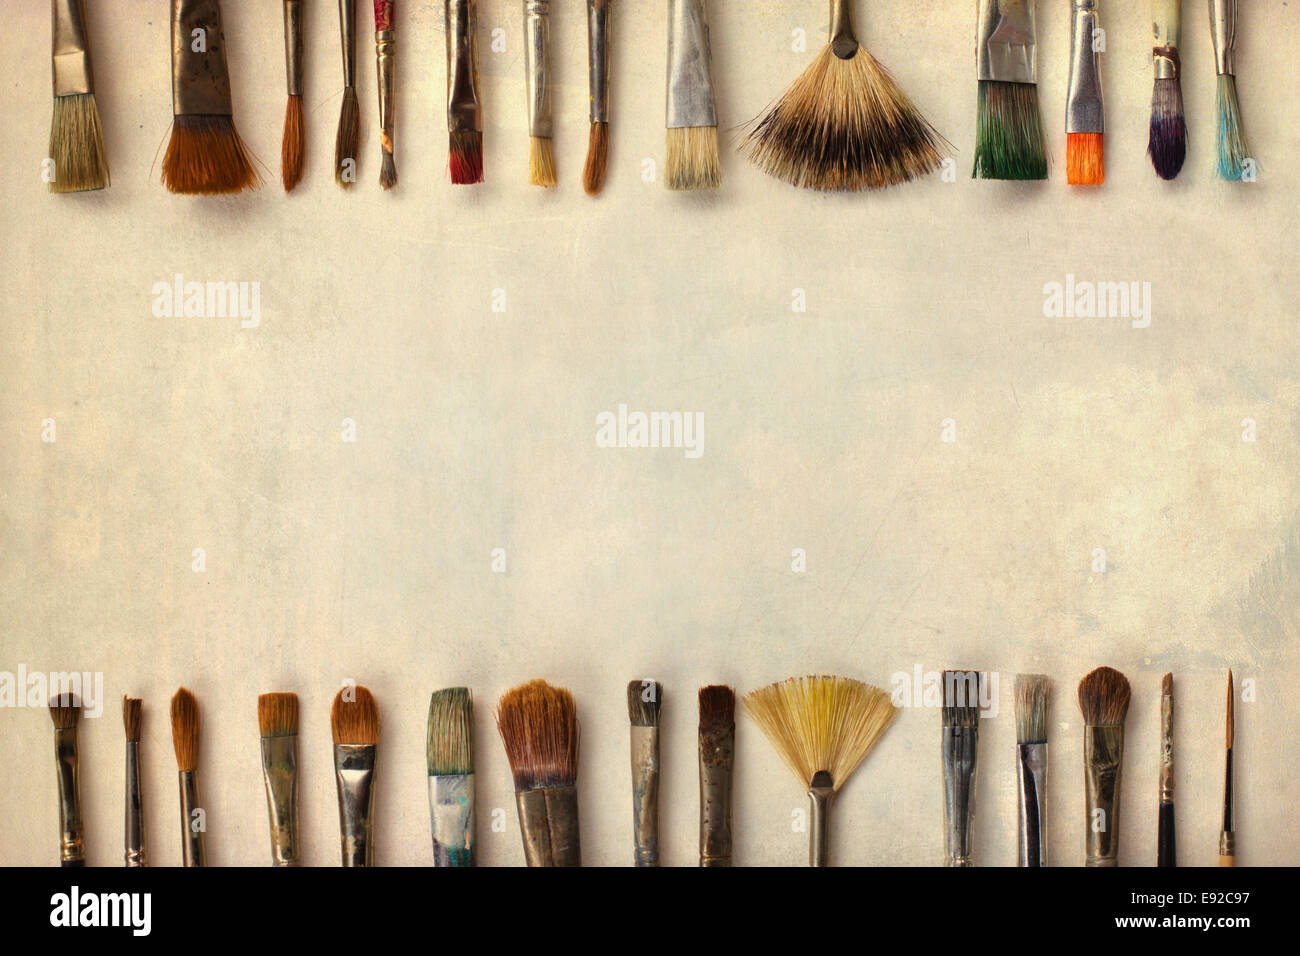 brushes as a decorative frame Stock Photo